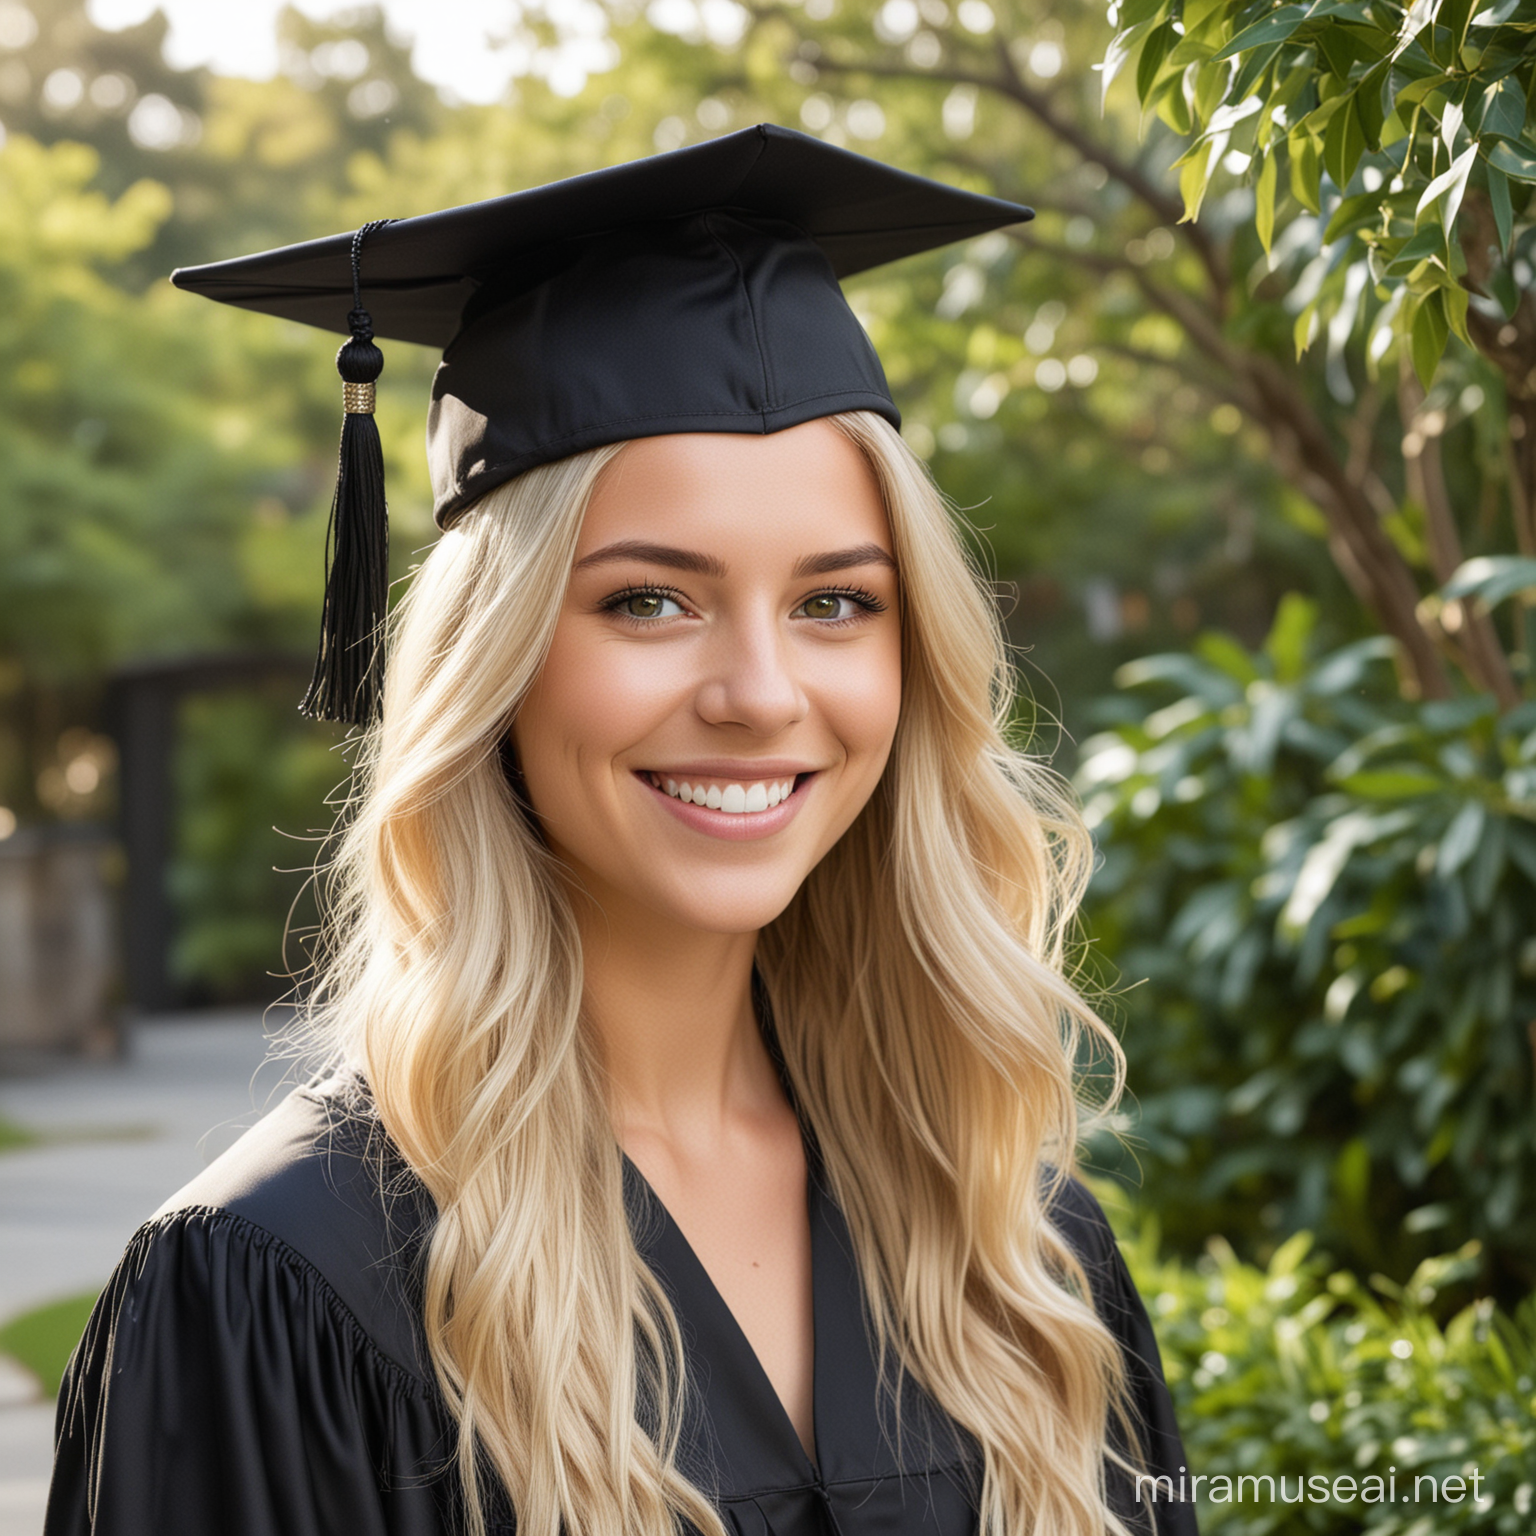 Radiant Young Woman in Black Graduation Cap and Gown Celebrating Achievement